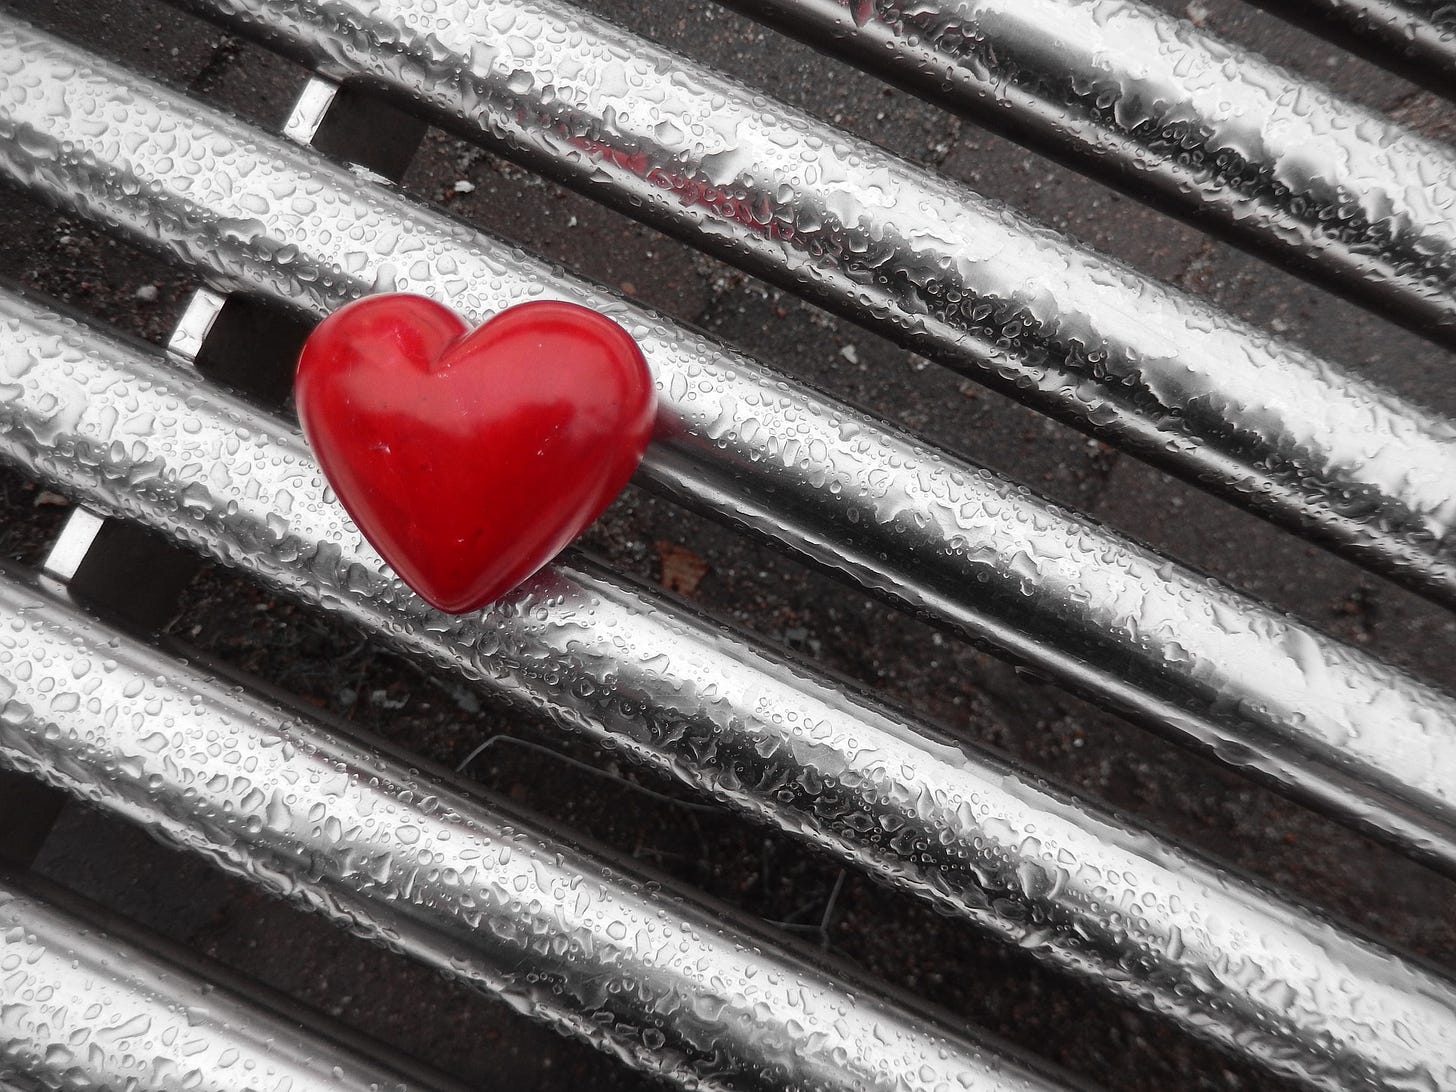 Heart on a metal grating